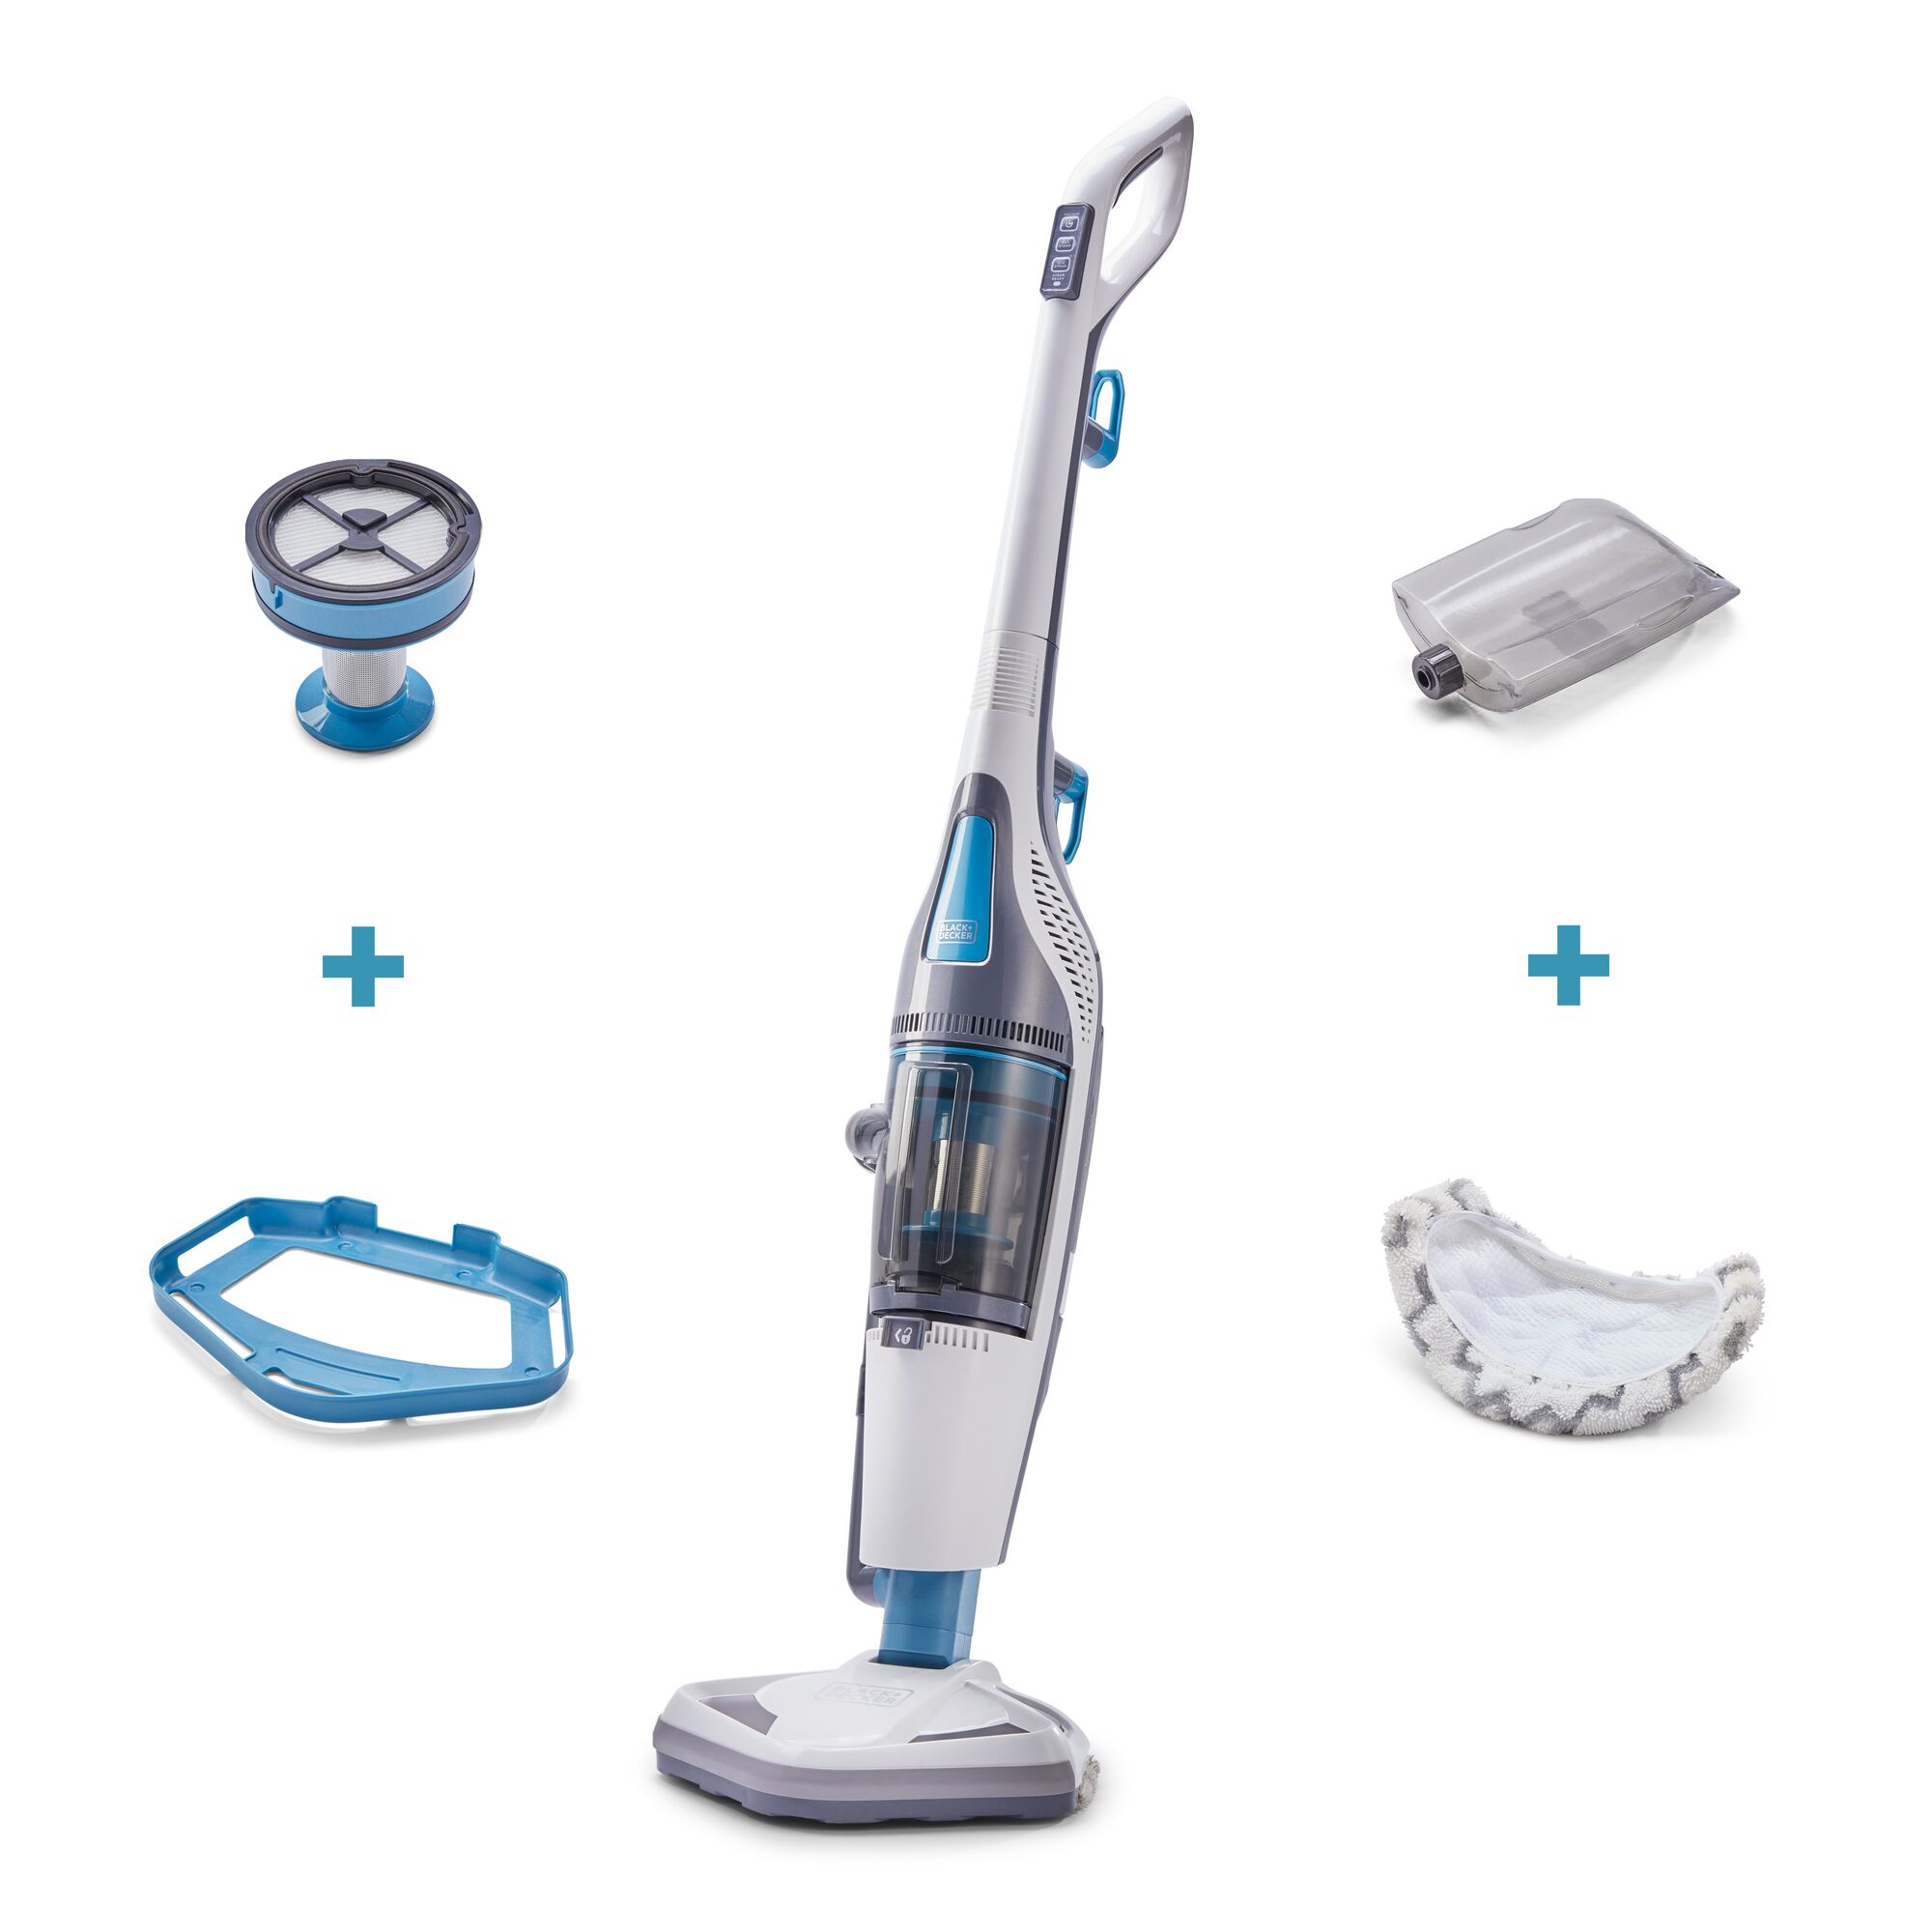 Kit components for the BLACK+DECKER steam mop and vacuum combo set